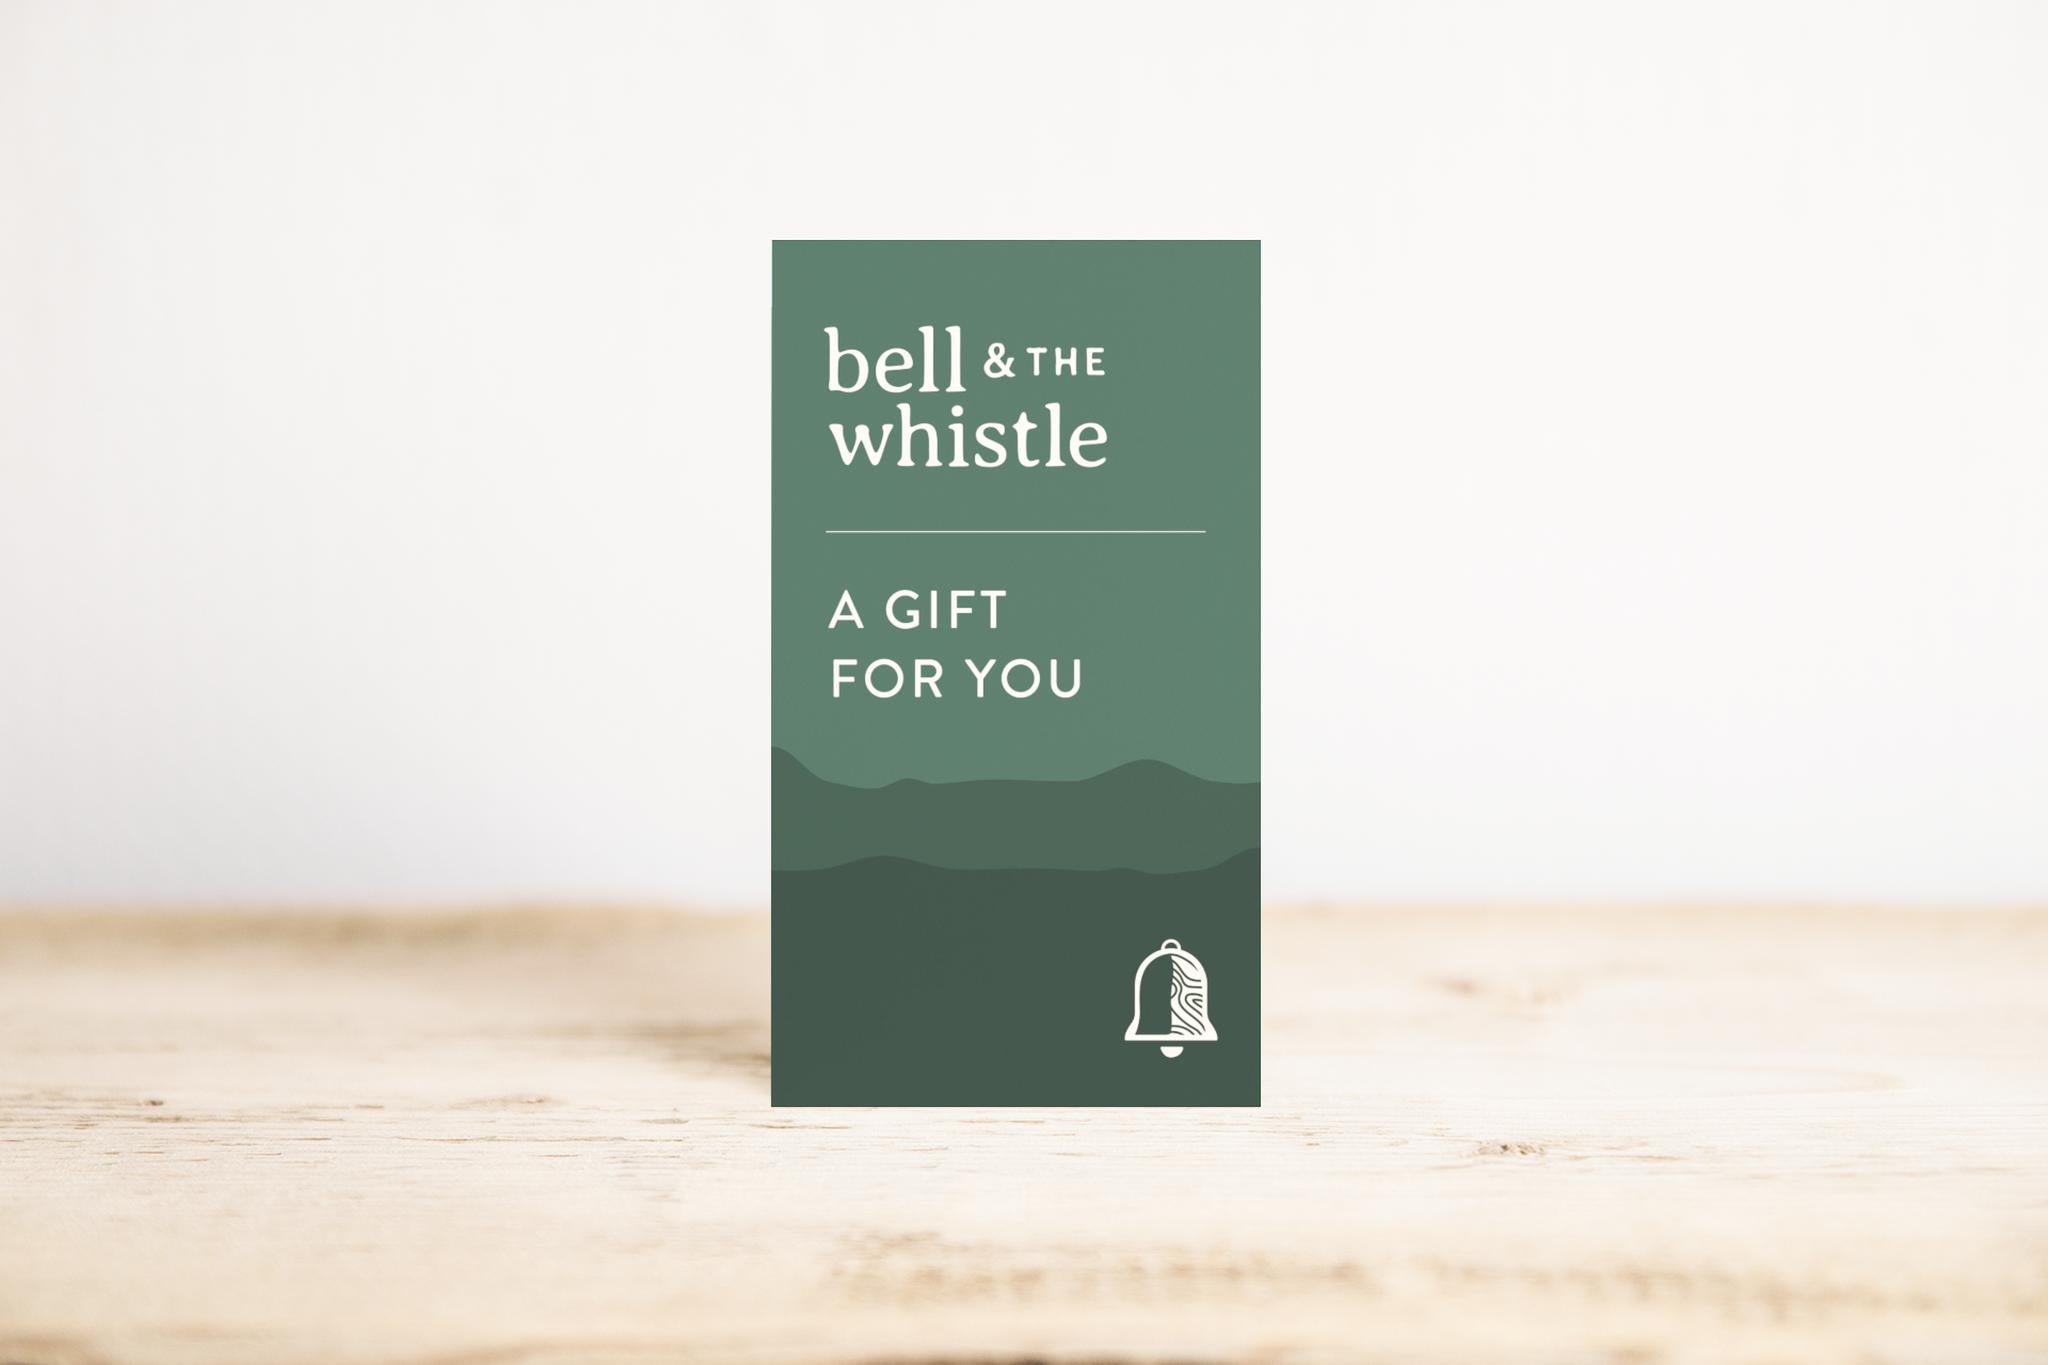 Bell & the Whistle Gift Card